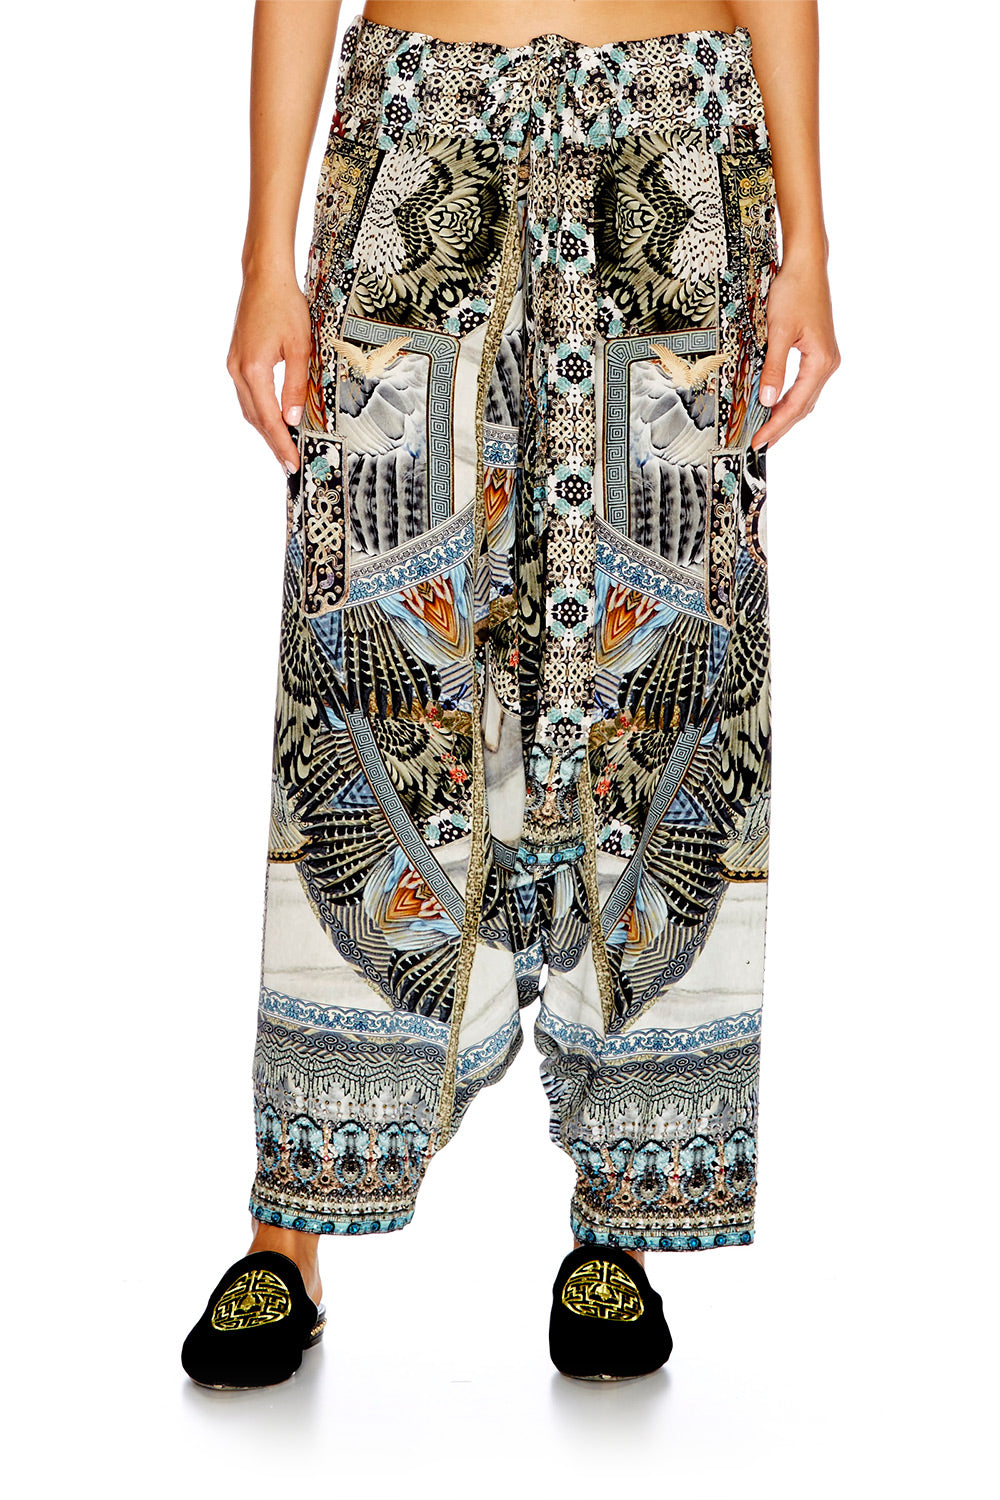 GIRL ON THE WING HAREM PANTS